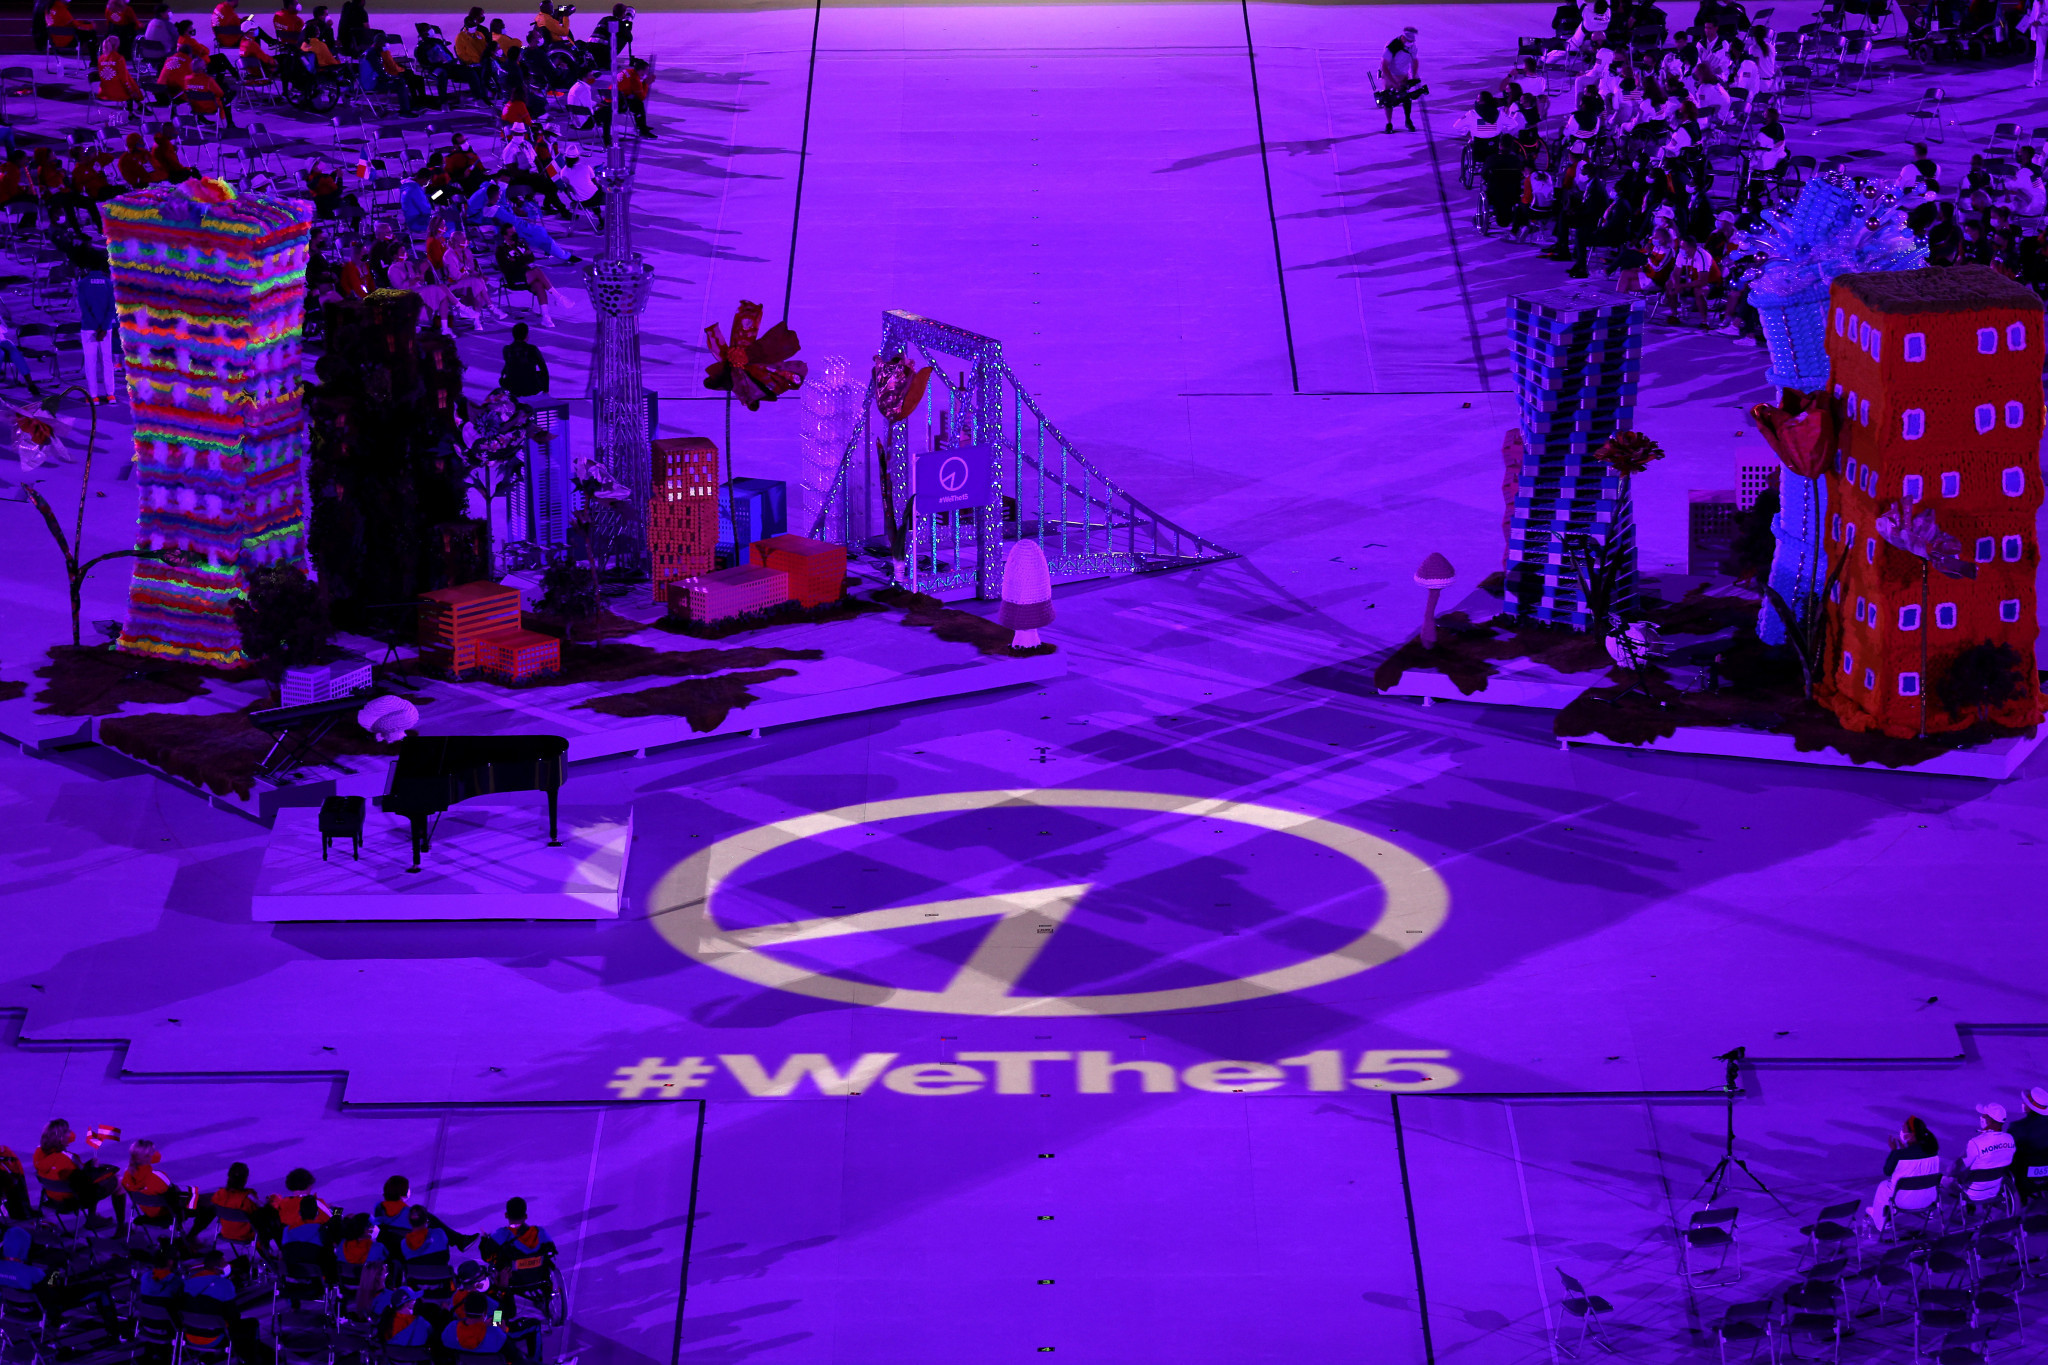 The WeThe15 human rights campaign was highlighted during the Closing Ceremony ©Getty Images